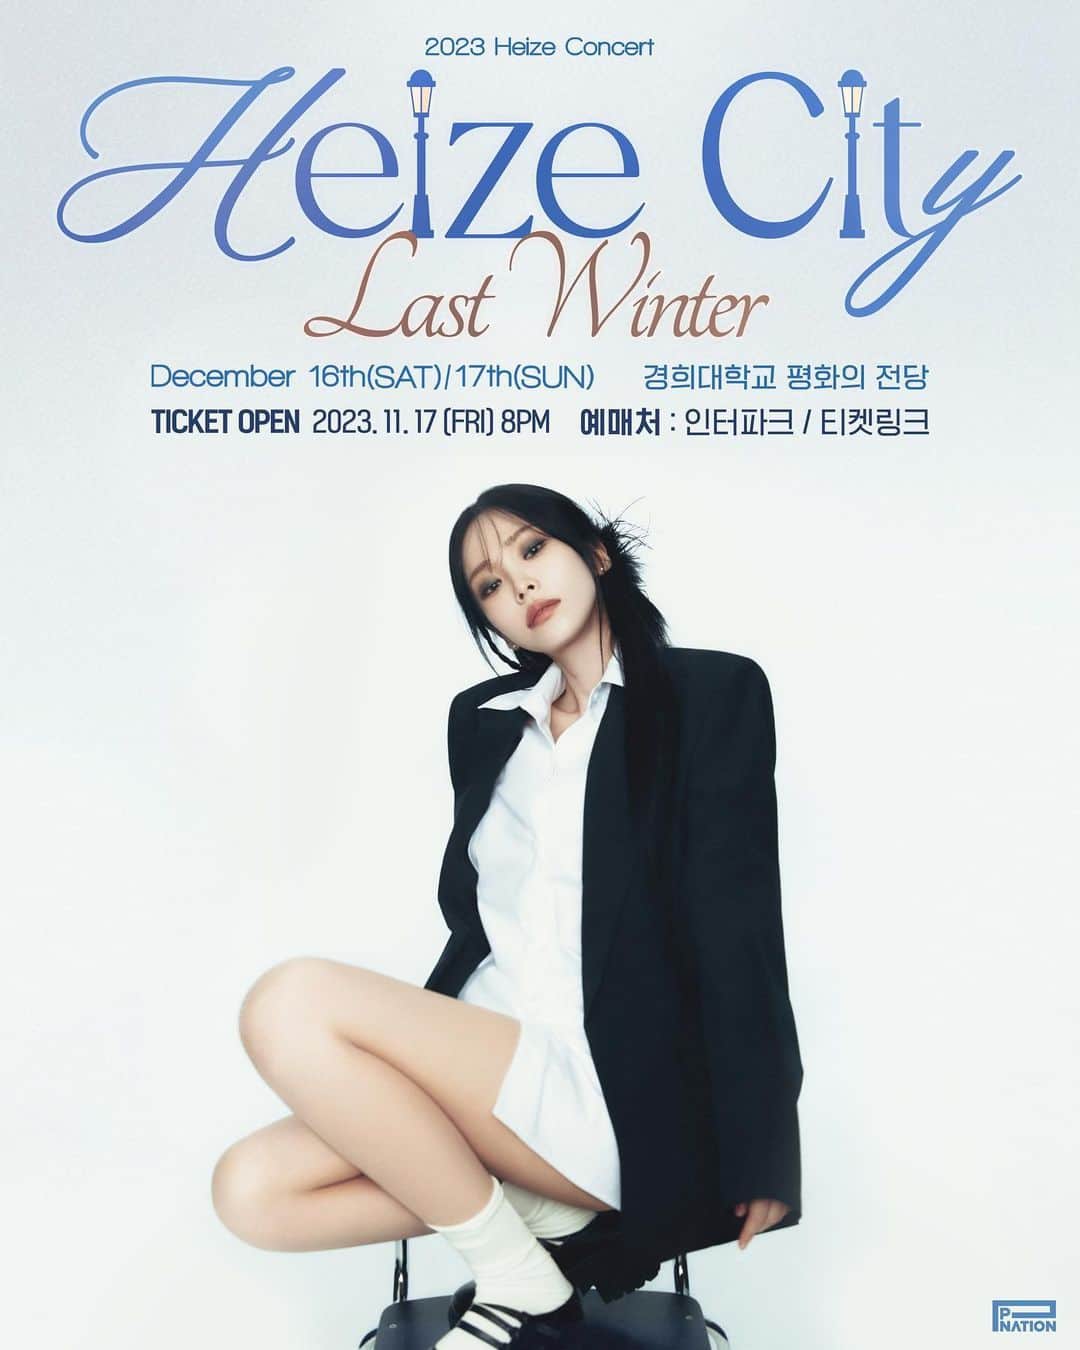 Heizeのインスタグラム：「[Heize] 오늘 오후 8시 2023 Heize Concert [Heize City : Last Winter] 예매가 시작됩니다! ❄️  ✔2023년 12월 16 / 17일 (December 16th, 17th) 📍경희대학교 평화의전당 (KYUNG HEE UNIVERSITY GRAND PEACE PALACE)  🔔티켓 오픈 (Ticket Open) : 11/17 8PM (KST) 🔗Ticket : Link in bio  @heizeheize from @pnation.official  #헤이즈 #Heize #concert #HeizeCity #헤이즈시티 #LastWinter #PNATION #피네이션」